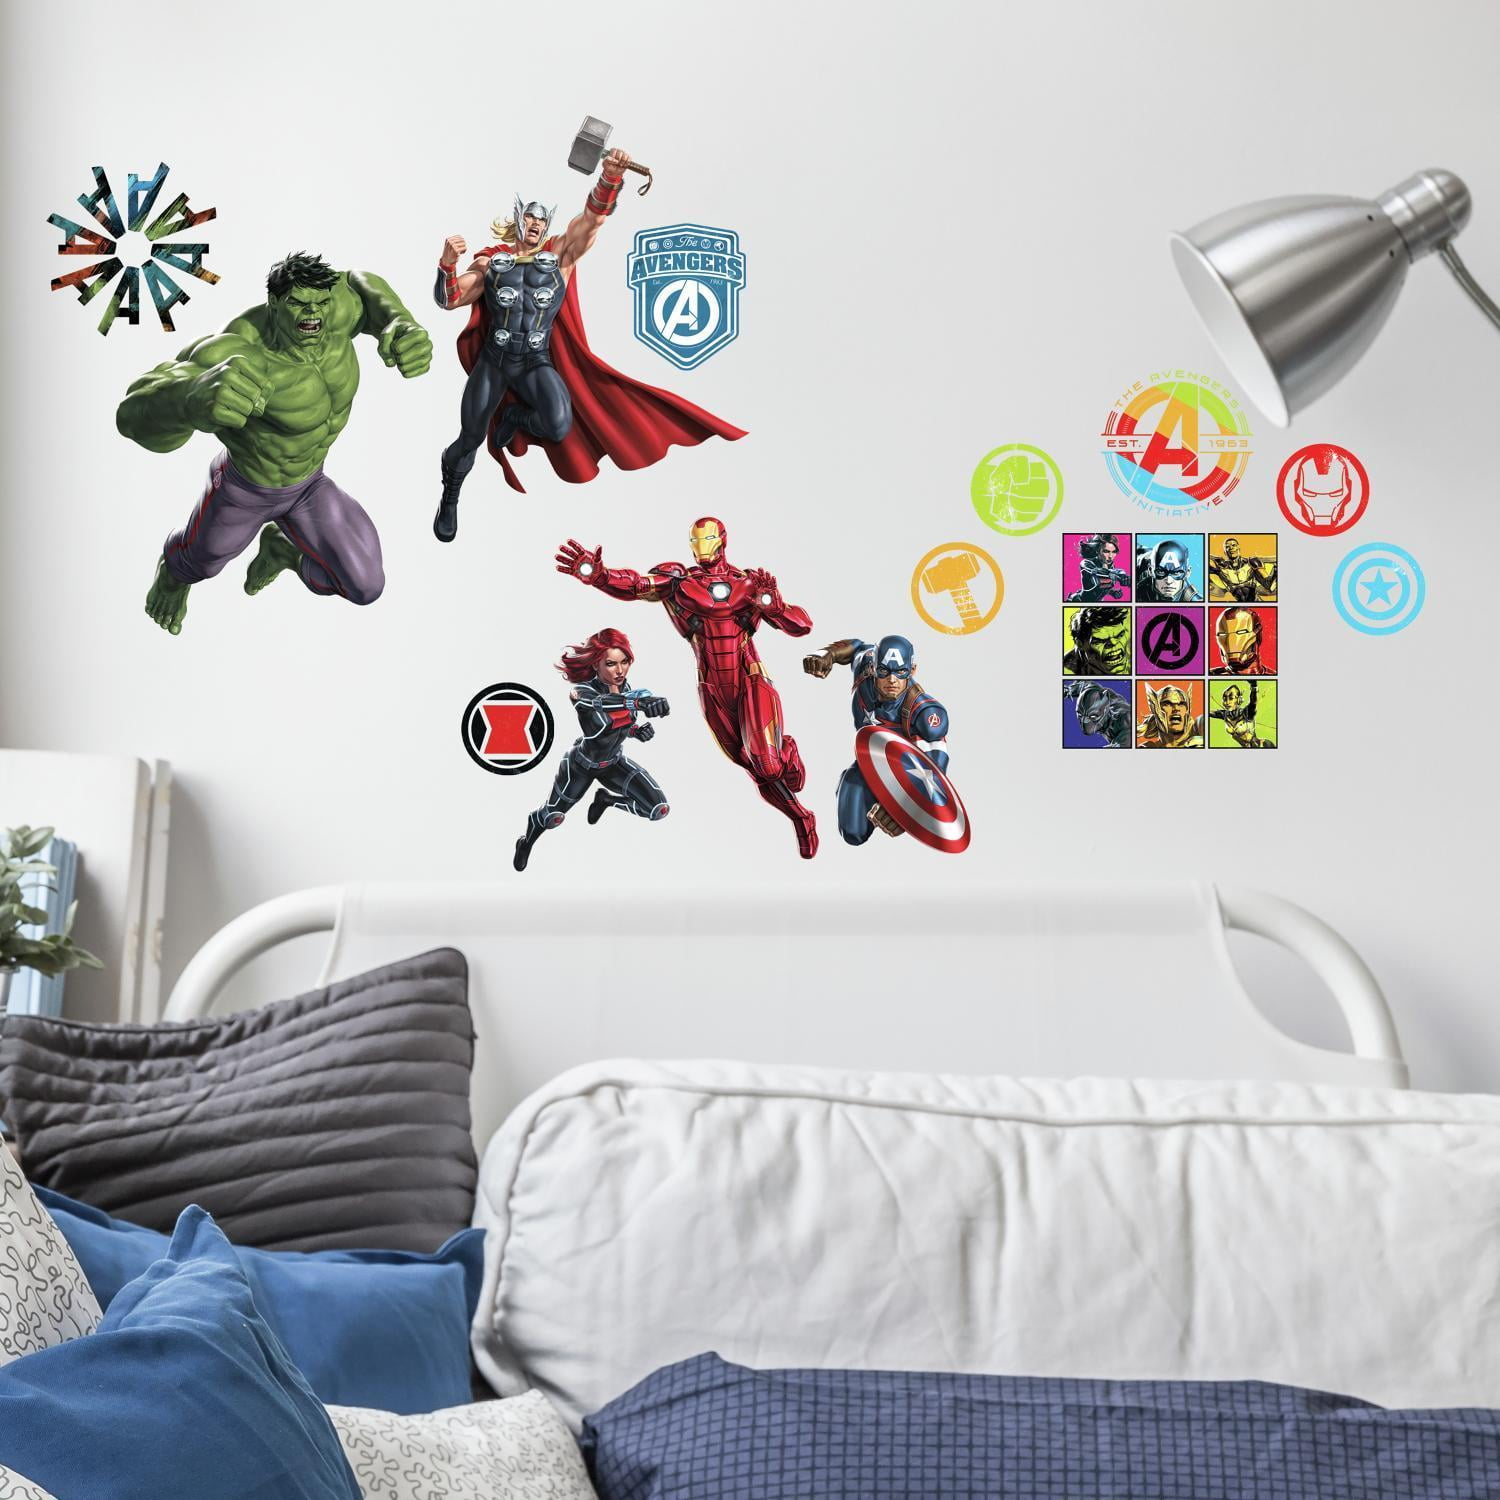 Thor: Avengers Core Removable Wall Decal